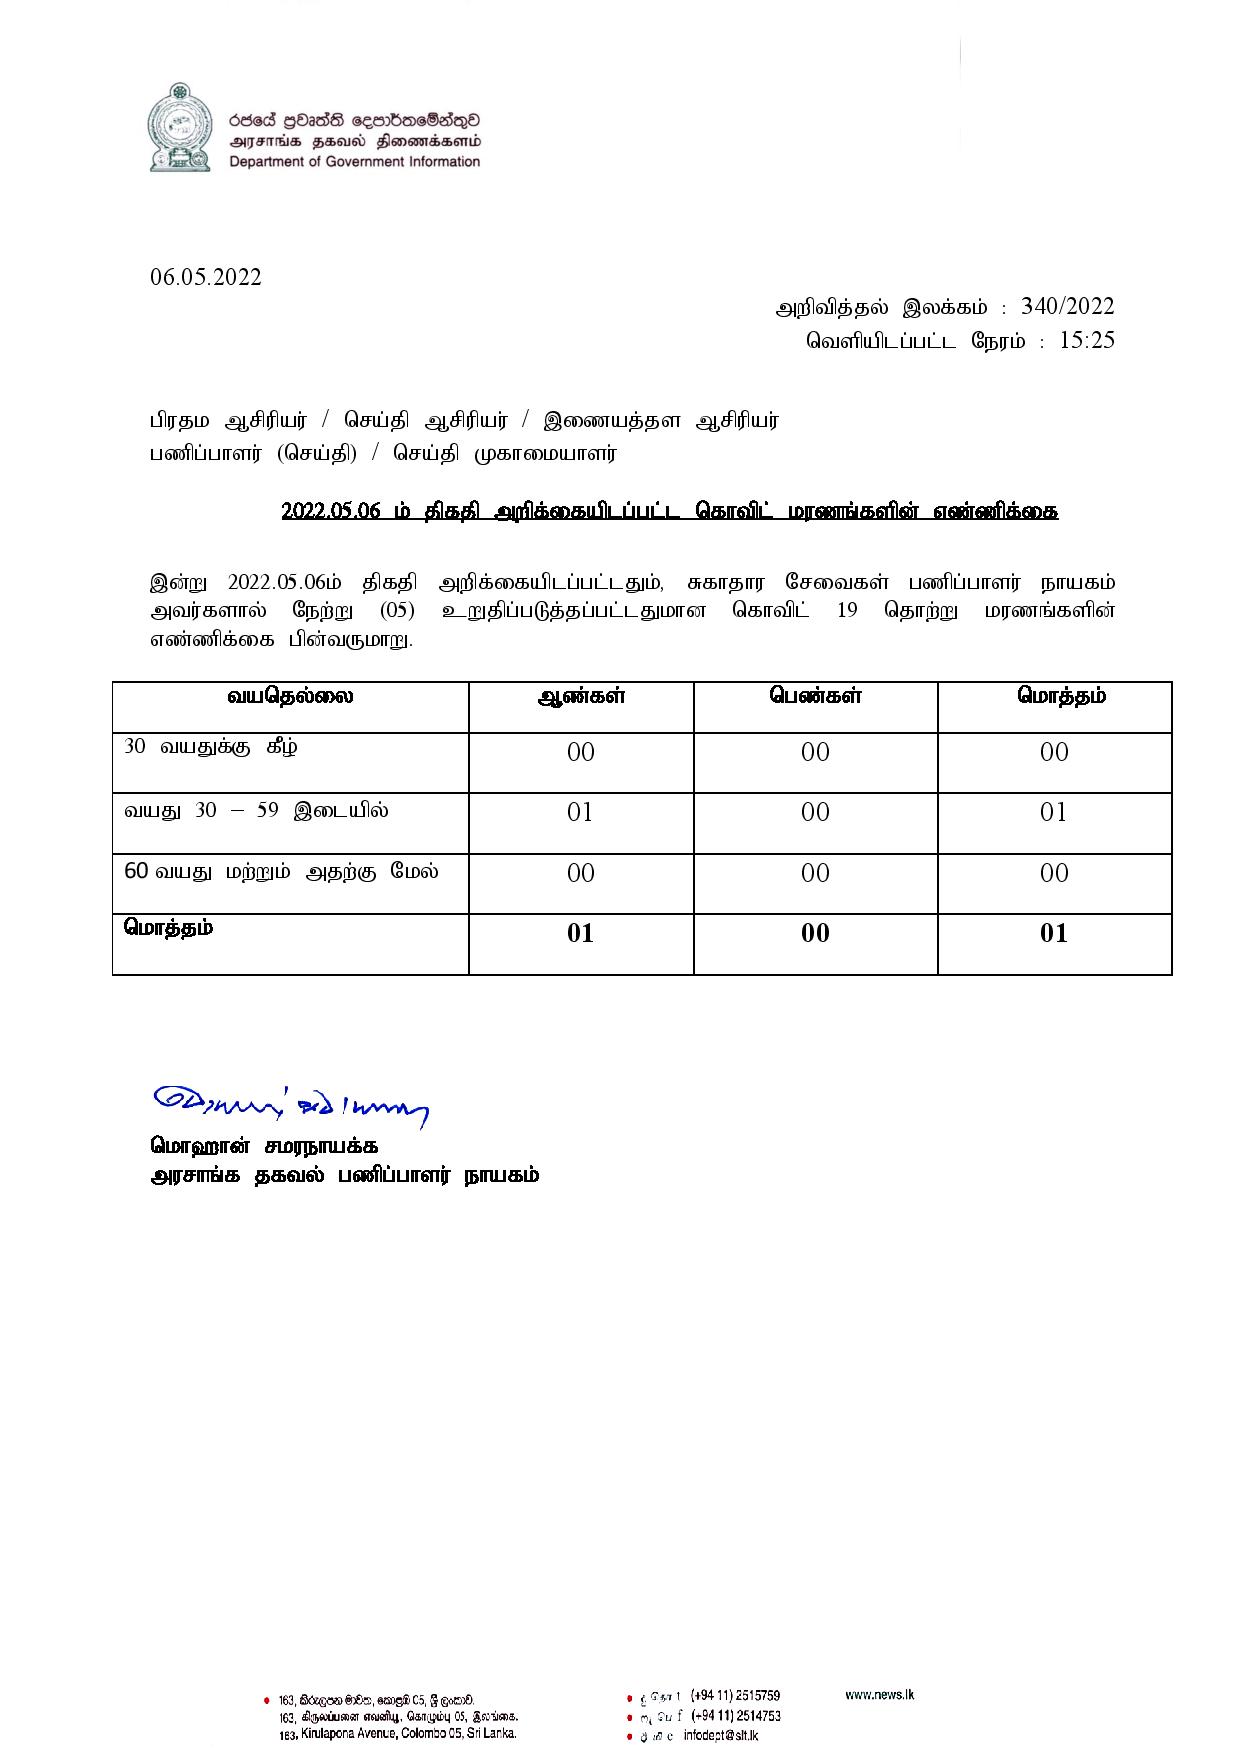 Release No 340 Tamil page 001